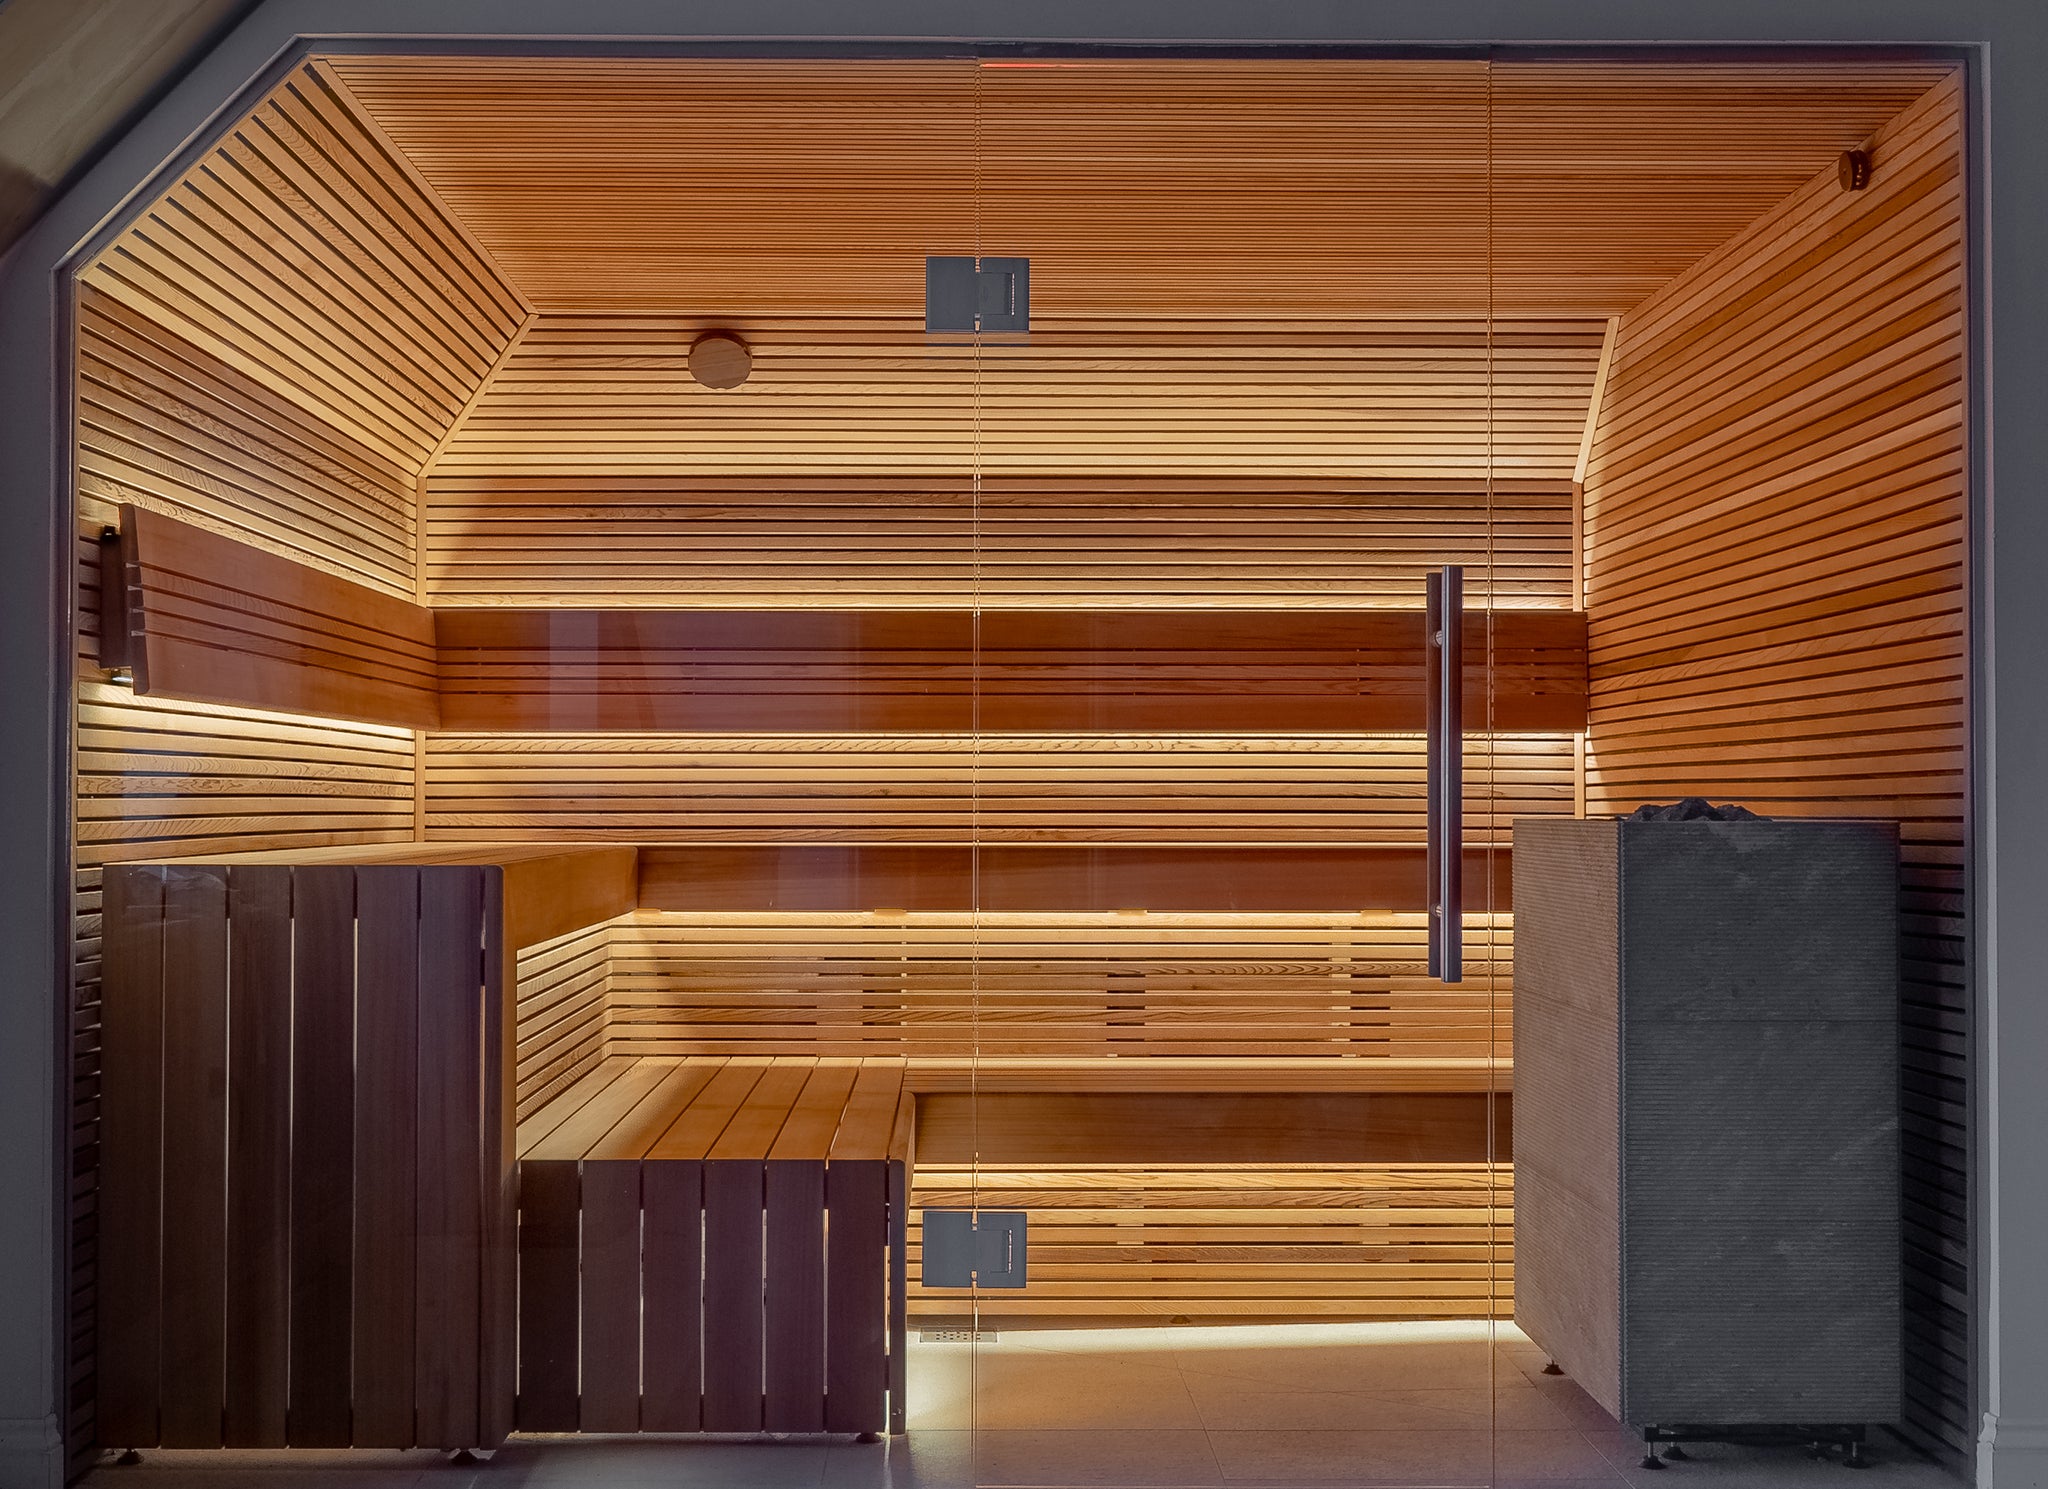 Bespoke Sauna Installation by Finnmark Sauna in Western Red Cedar with Tulikivi Tuisku XL sauna heater. The cladding is slatted red cedar boards mounted with a shadow gap and the sauna bench system has a waterfall edge mitre.